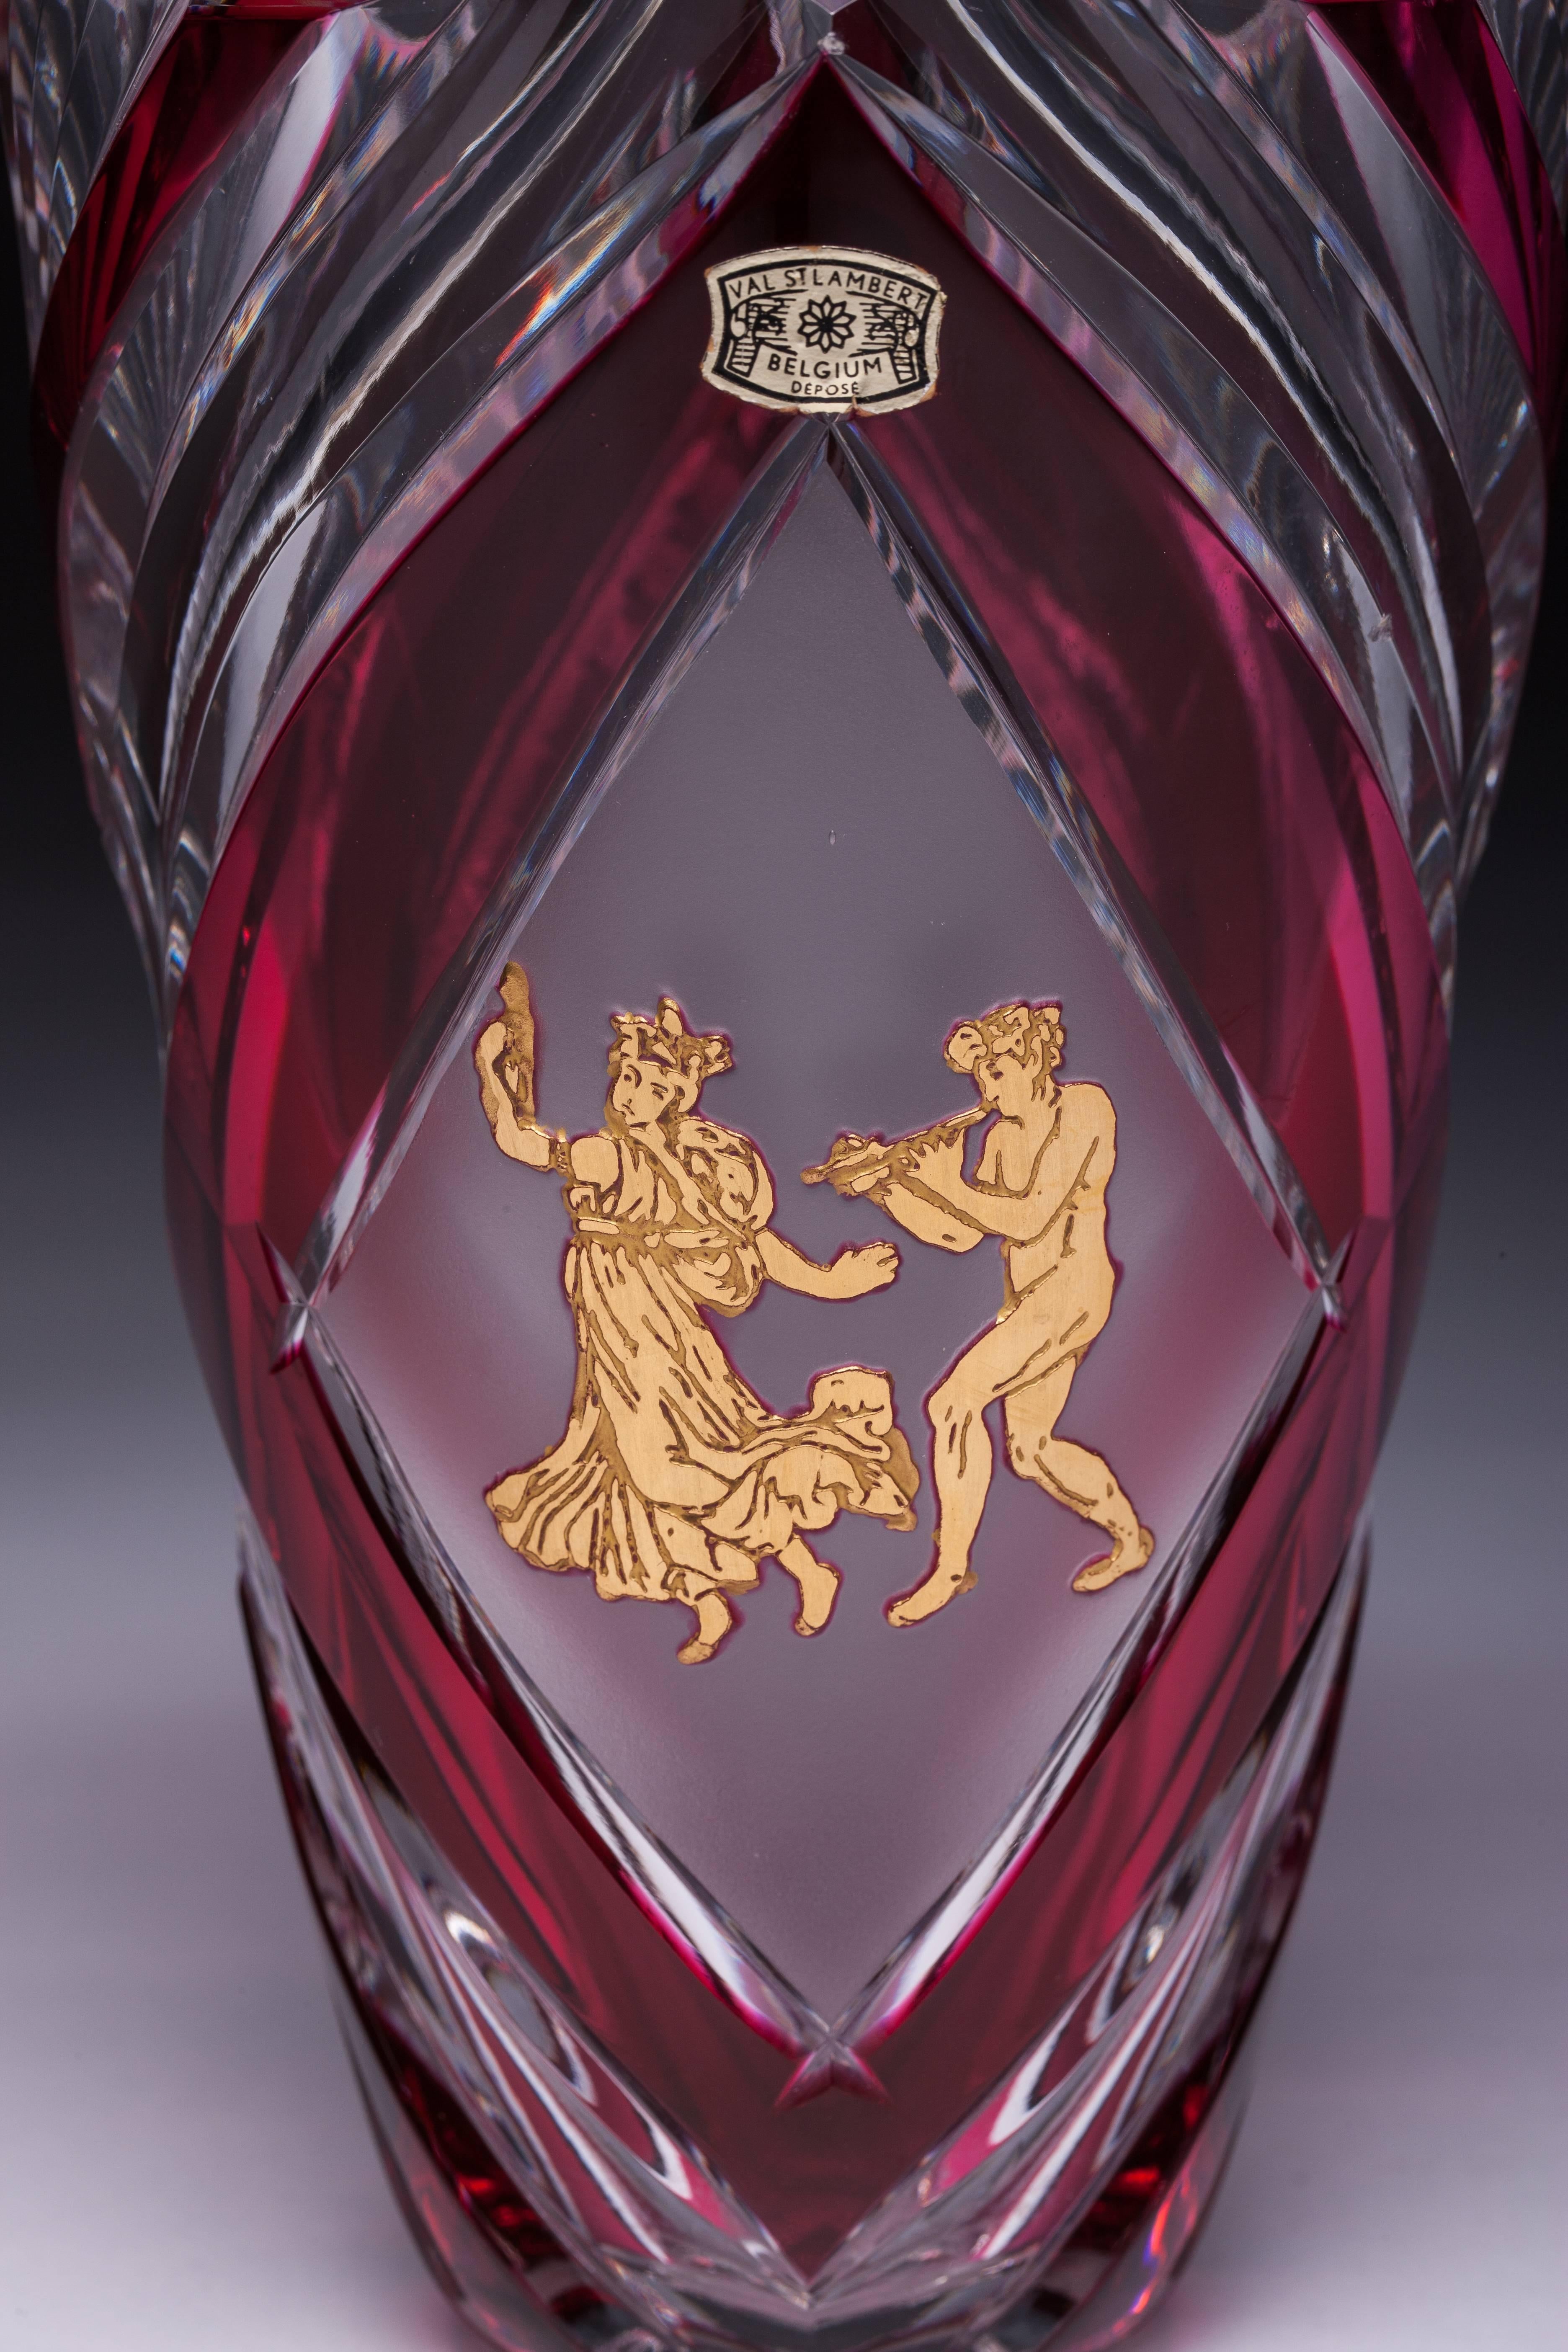 A charming Val Saint Lambert Beaudoin Rose ruby red art glass cordial vase, circa 1930. Beautiful frosted etched central image with heavily rich gilt Danse de Flore in the middle of the vase.

The glassworks of Val-Saint-Lambert were created in